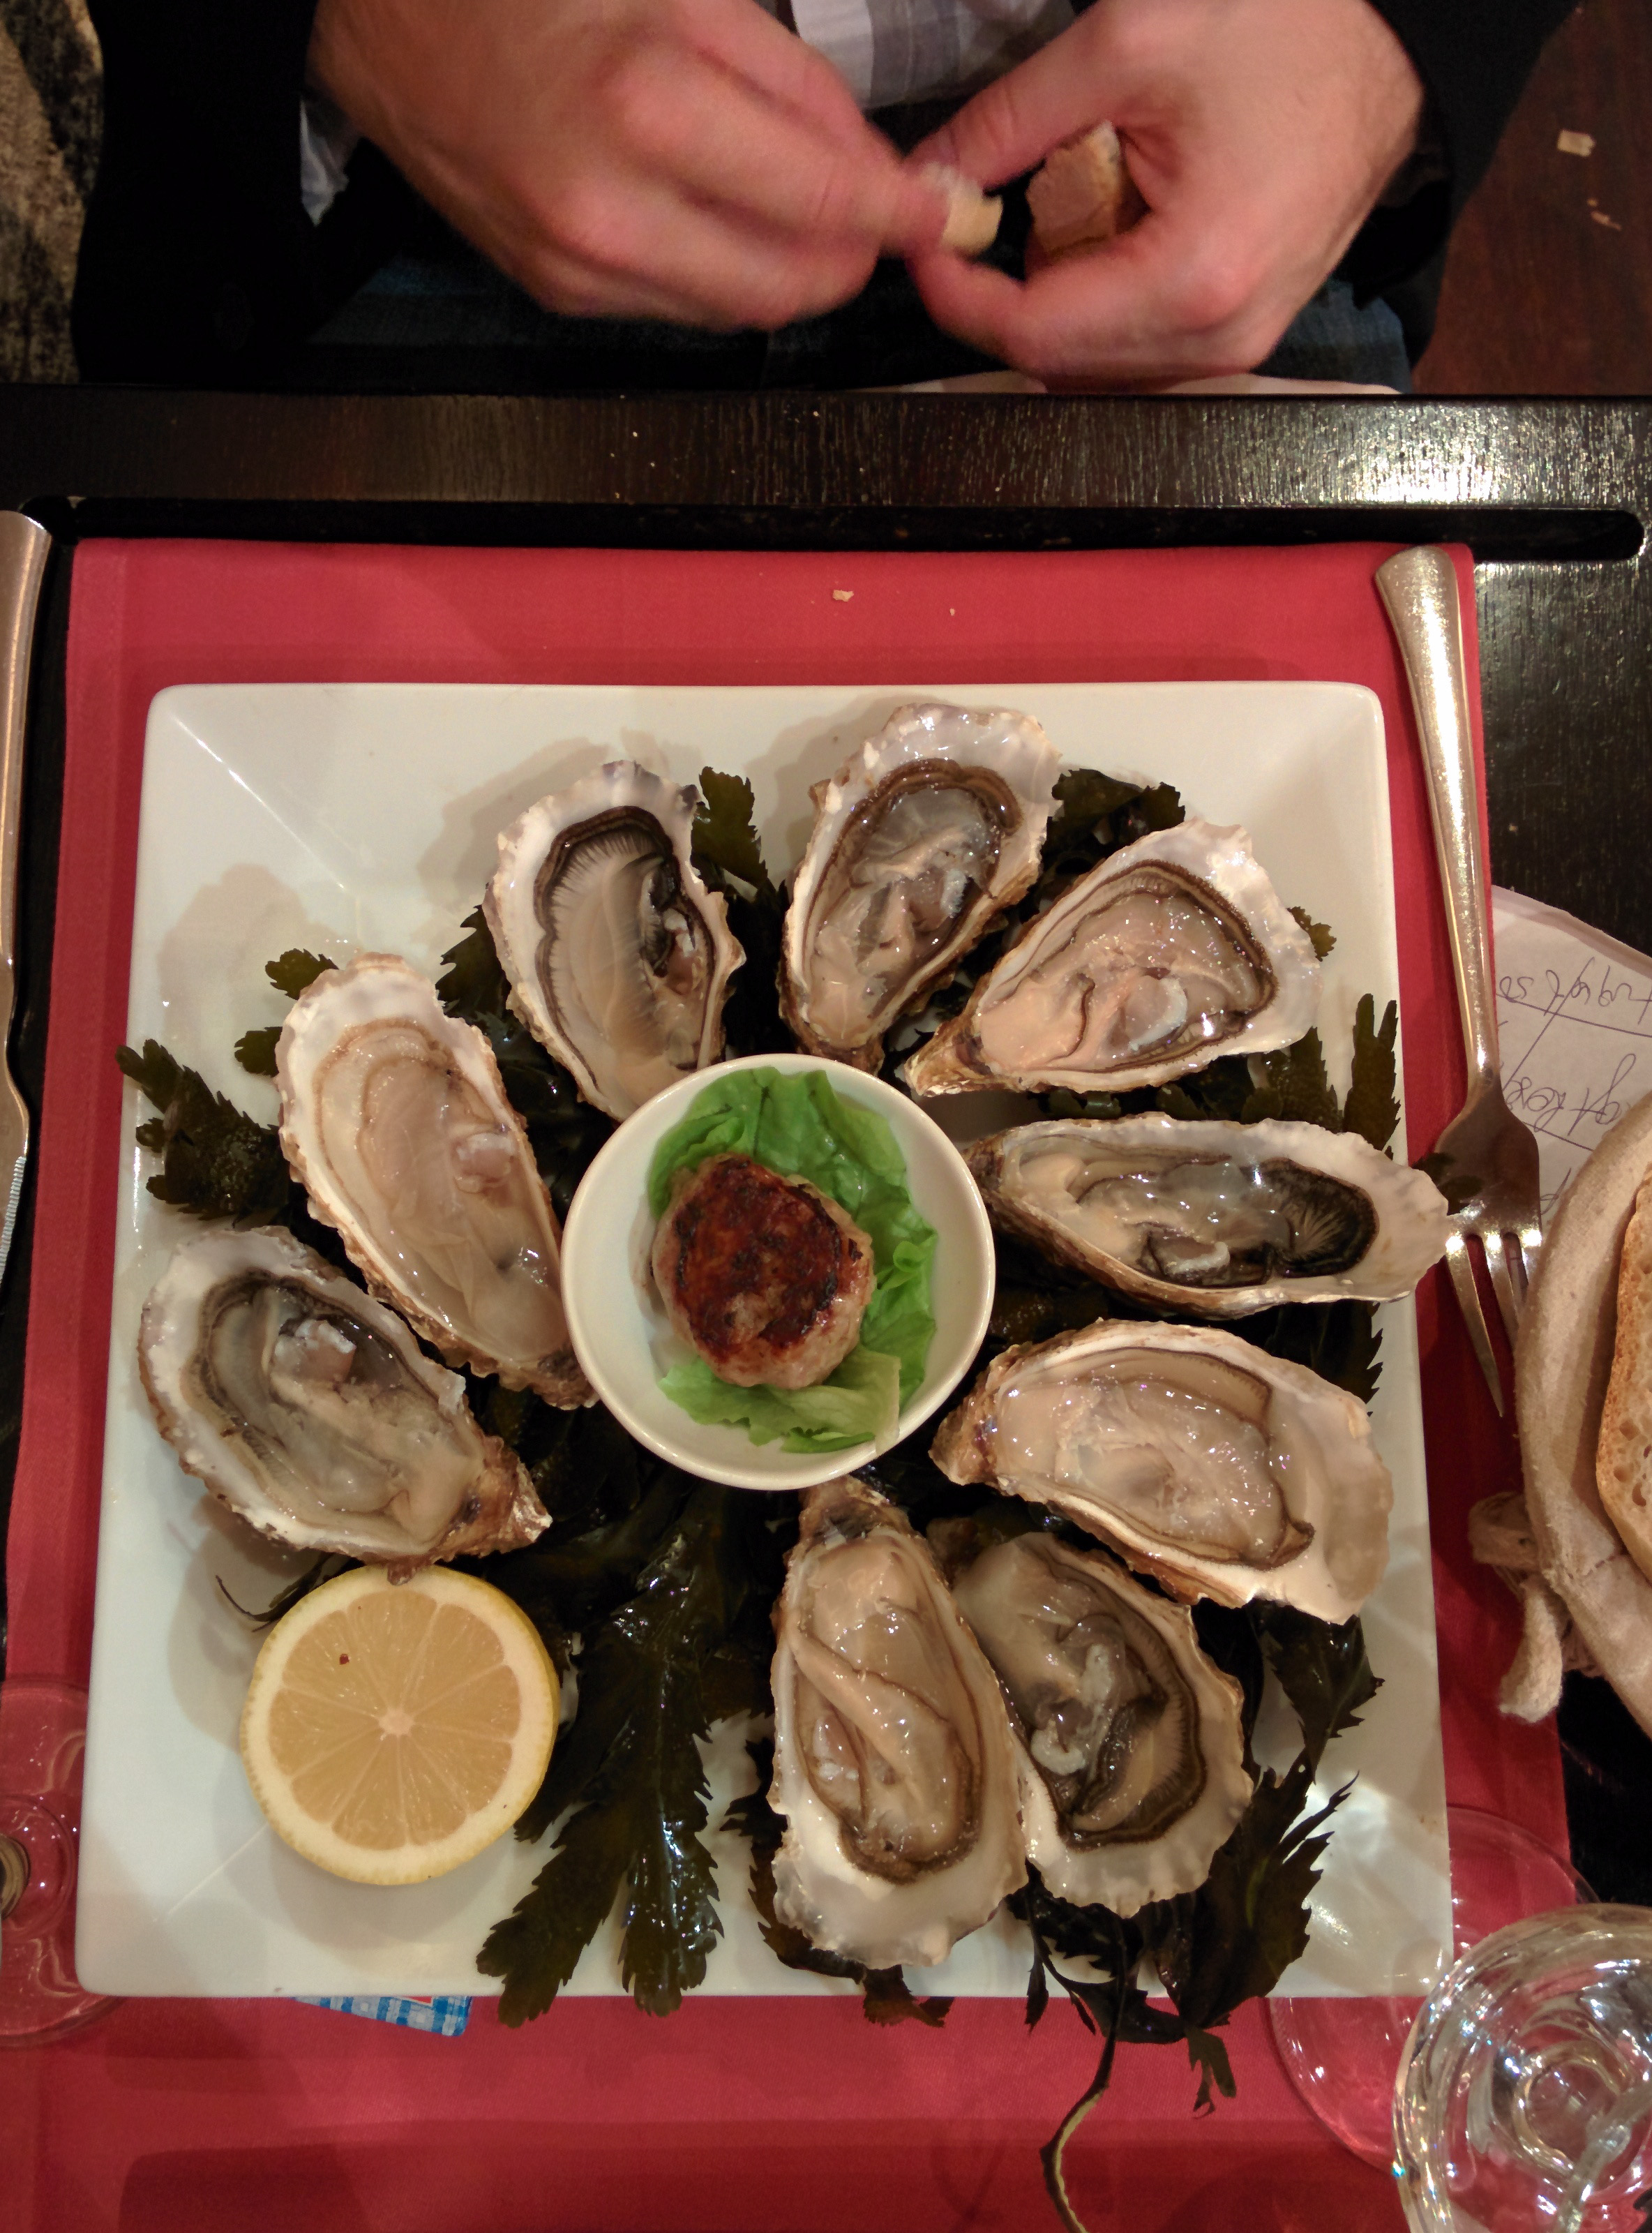 the oysters are all mine!